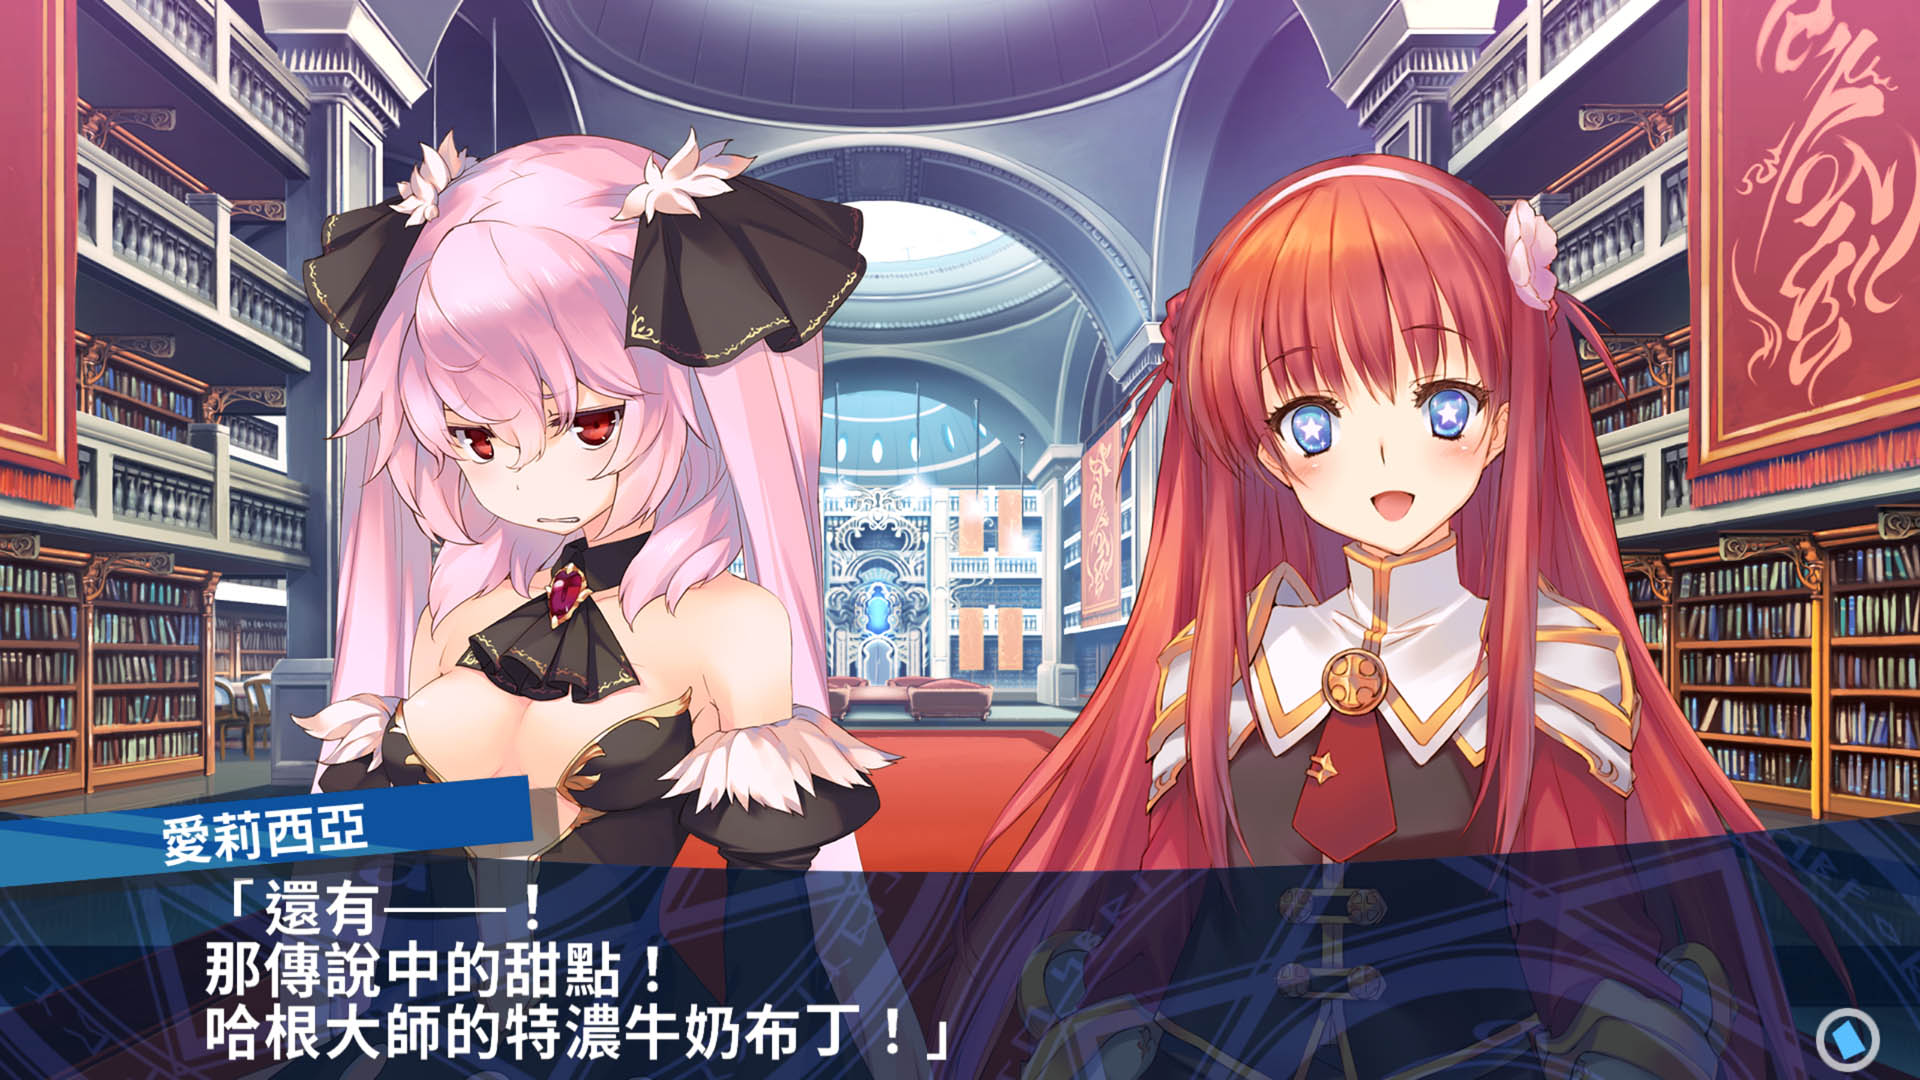 Dungeon Travelers 2: The Royal Library & the Monster Seal (Traditional Chinese) - RPG - 1 - Select